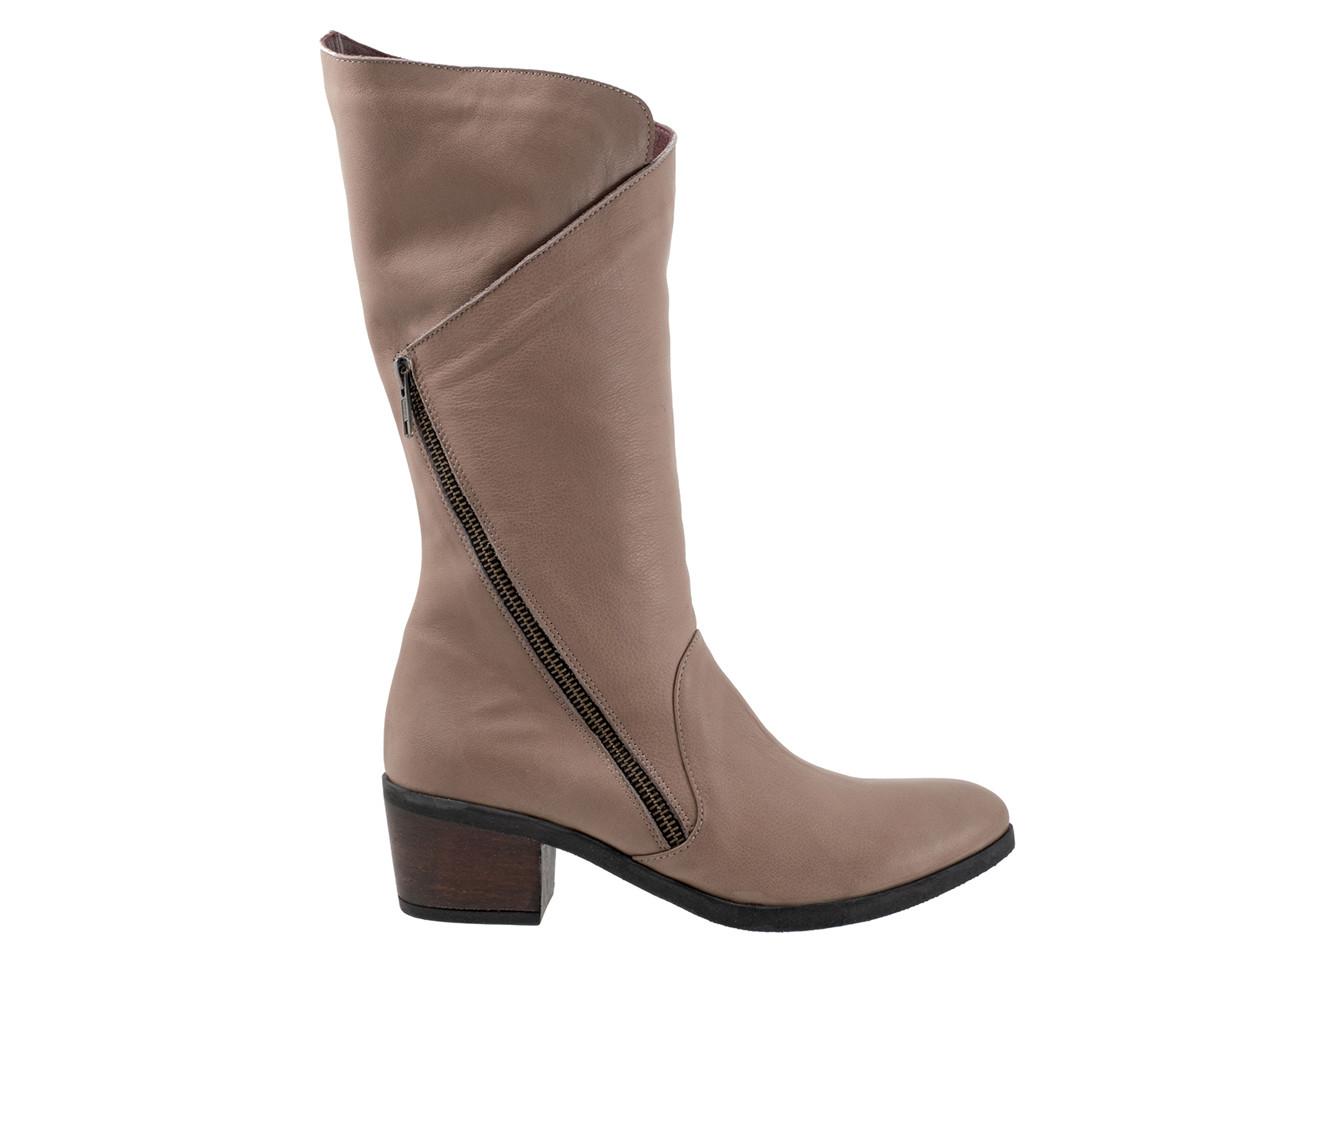 Women's Bueno Camille Knee High Boots